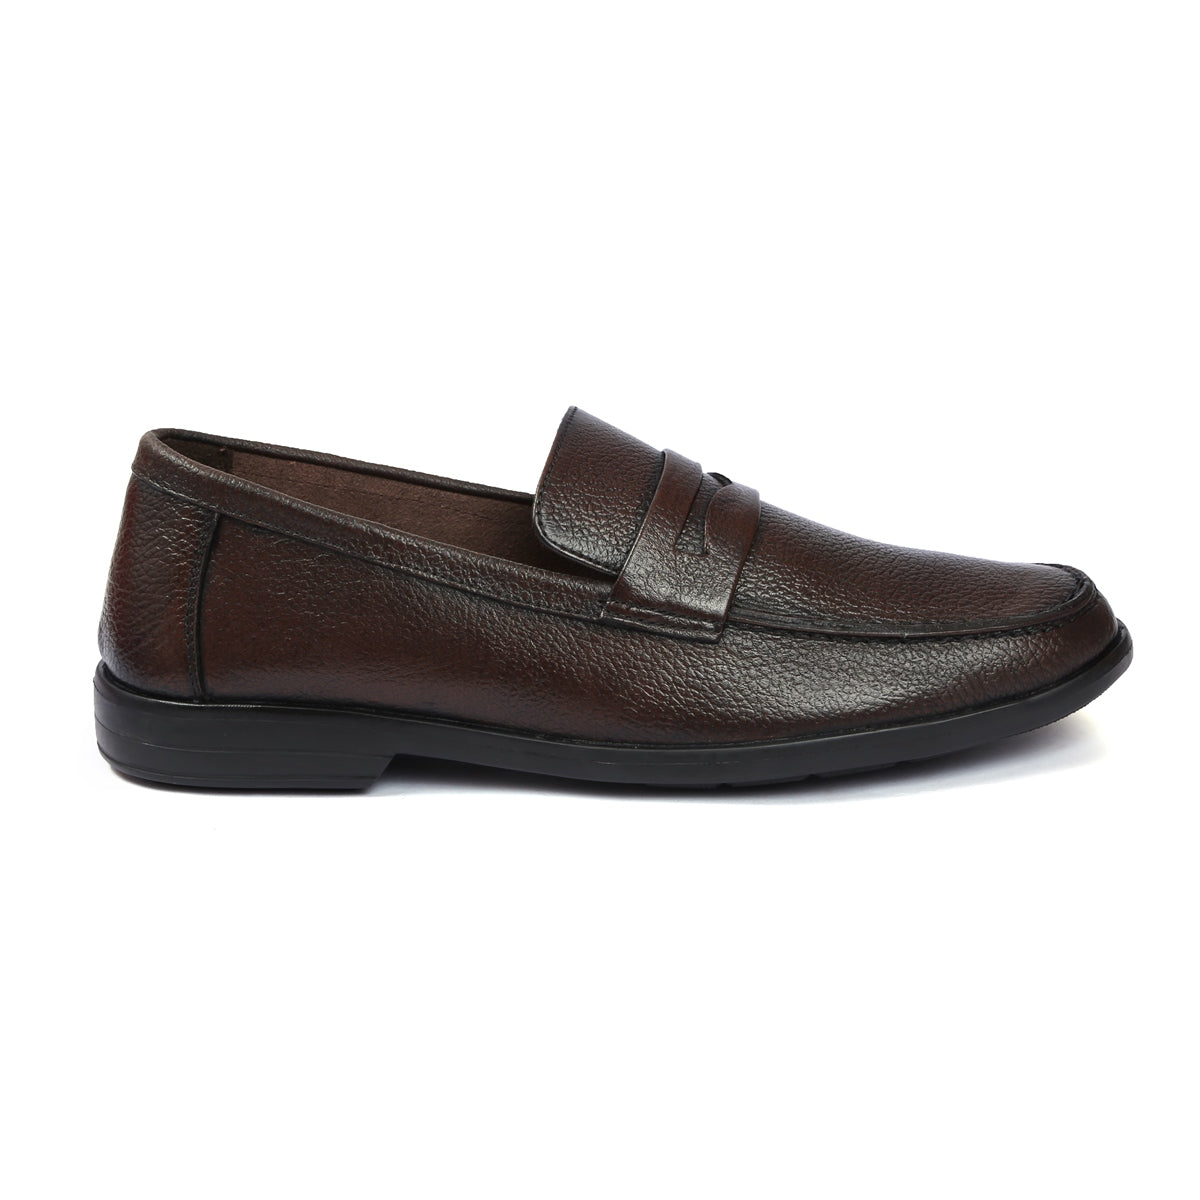 Penny Loafers for Men_brown1